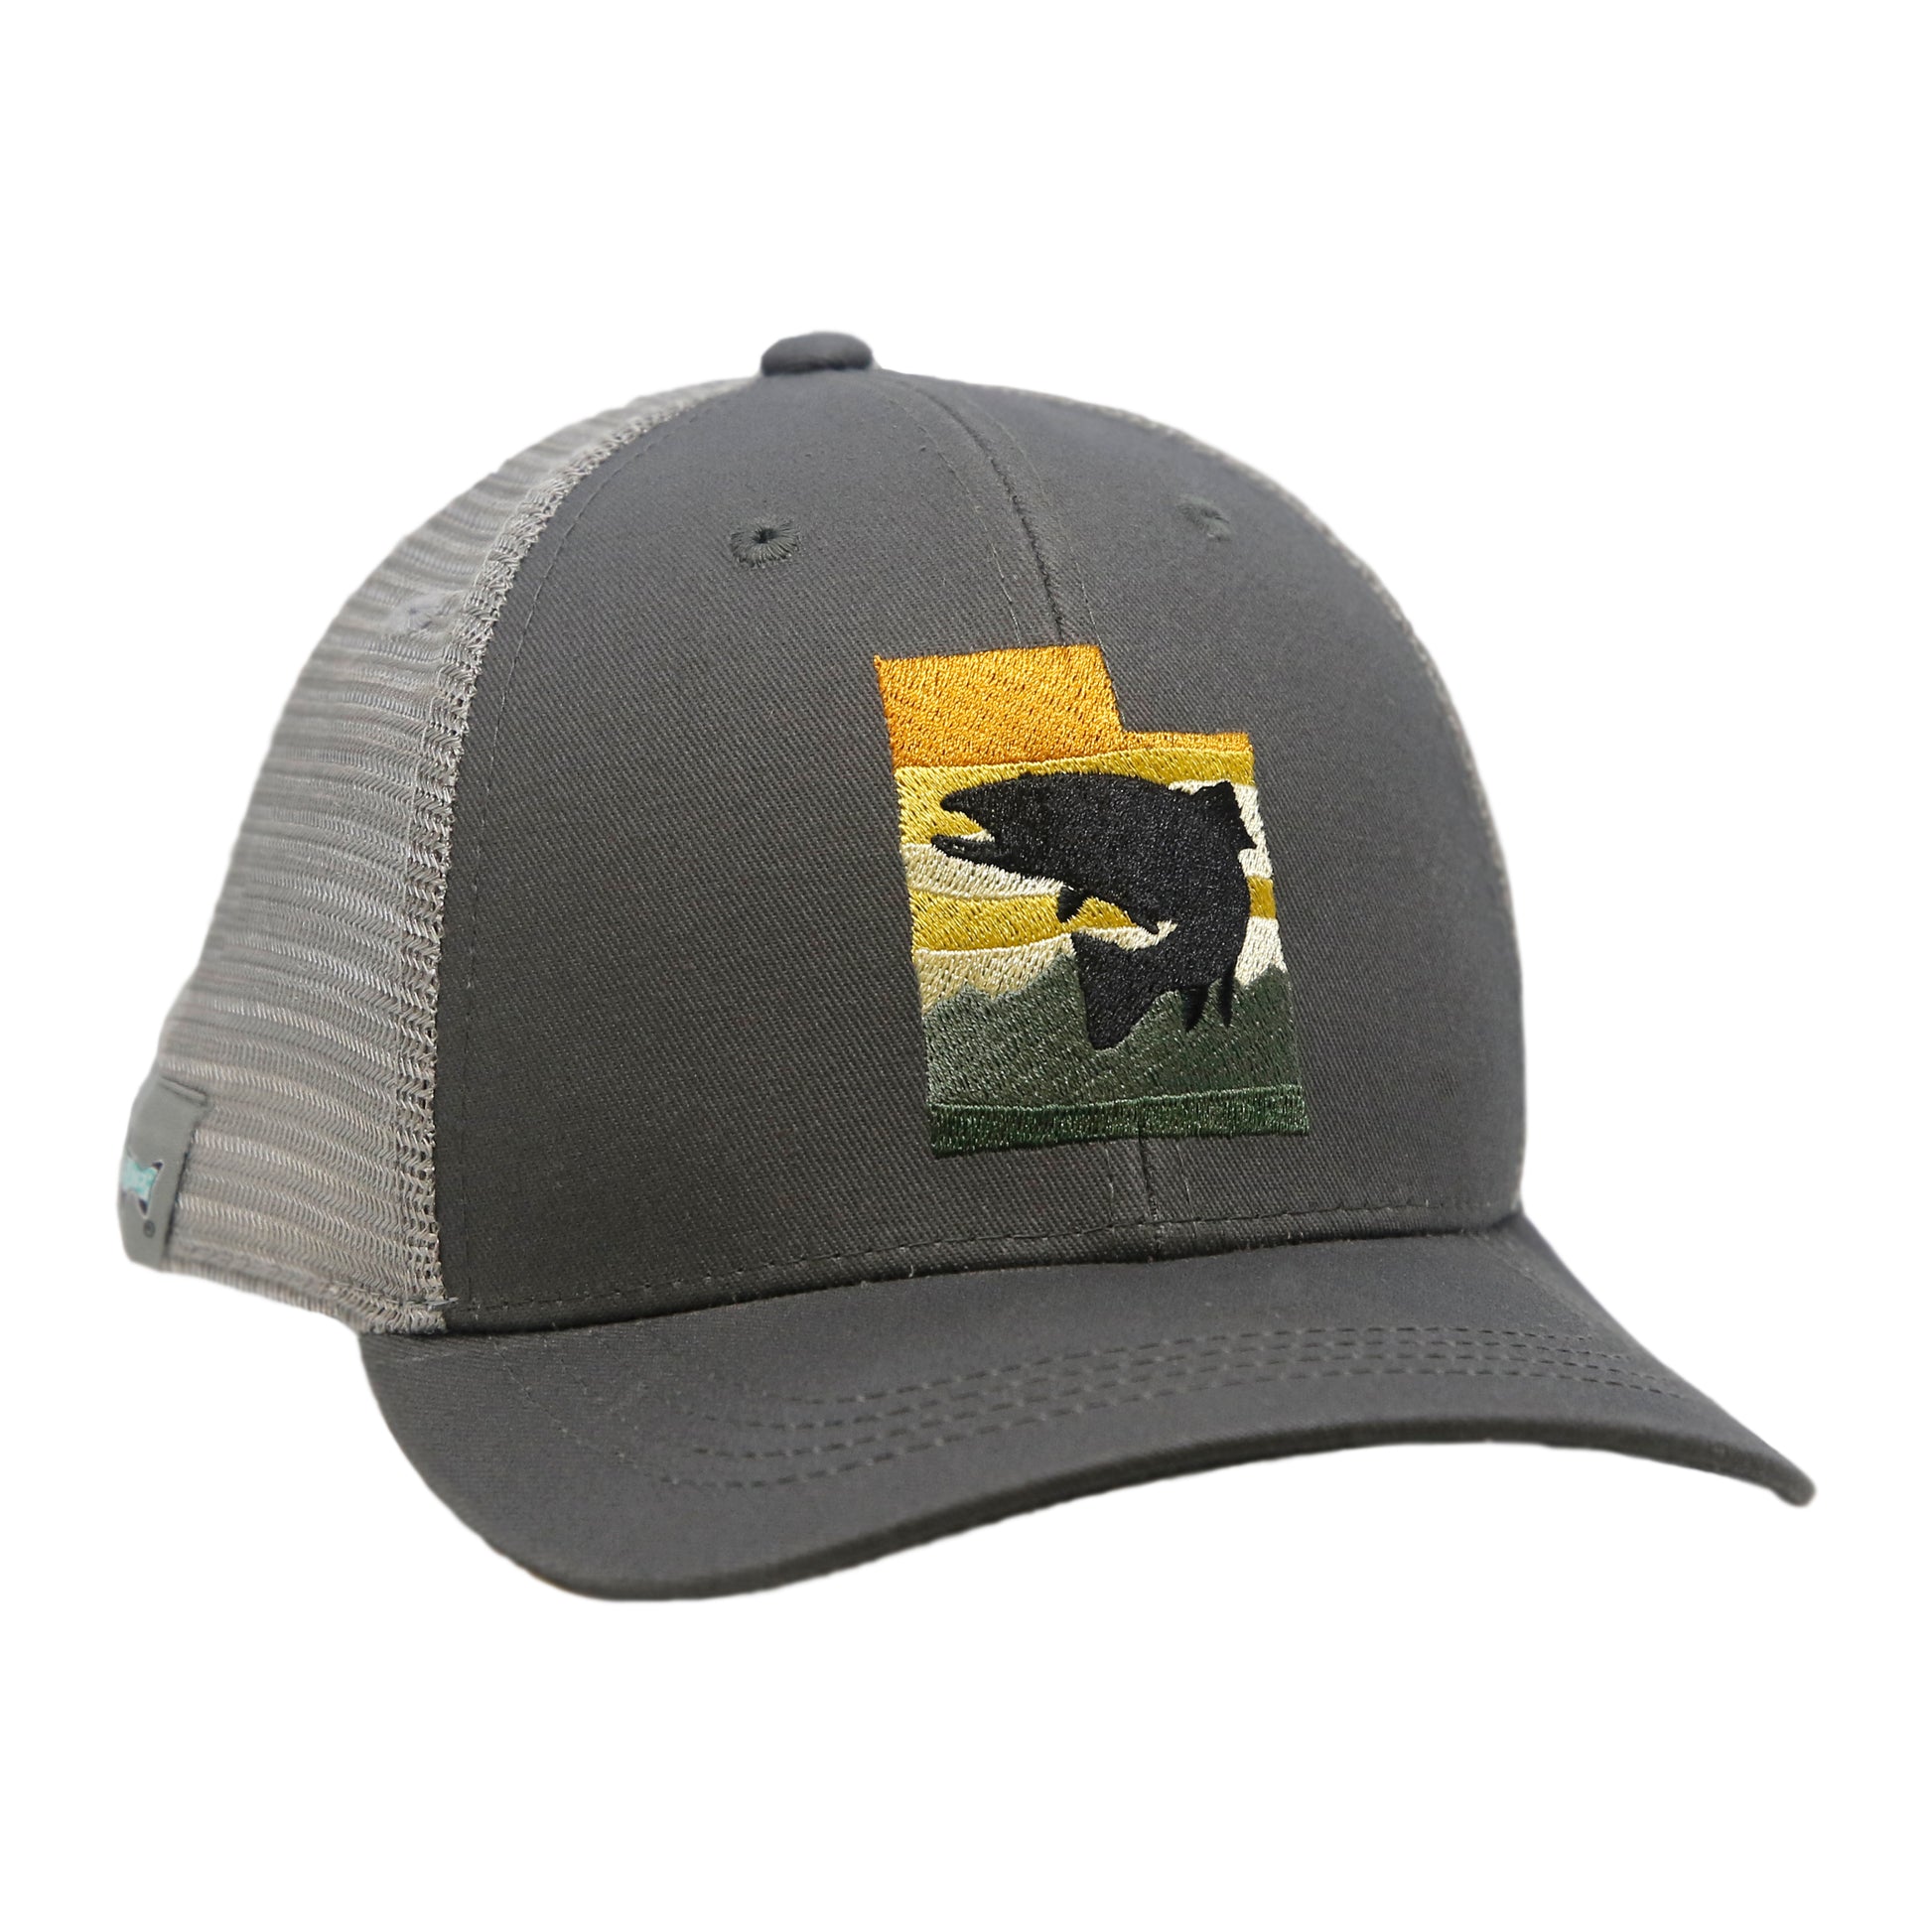 A hat with gray mesh and gray fabric has a design in the shape of utah with trout in front of a mountain and sunset